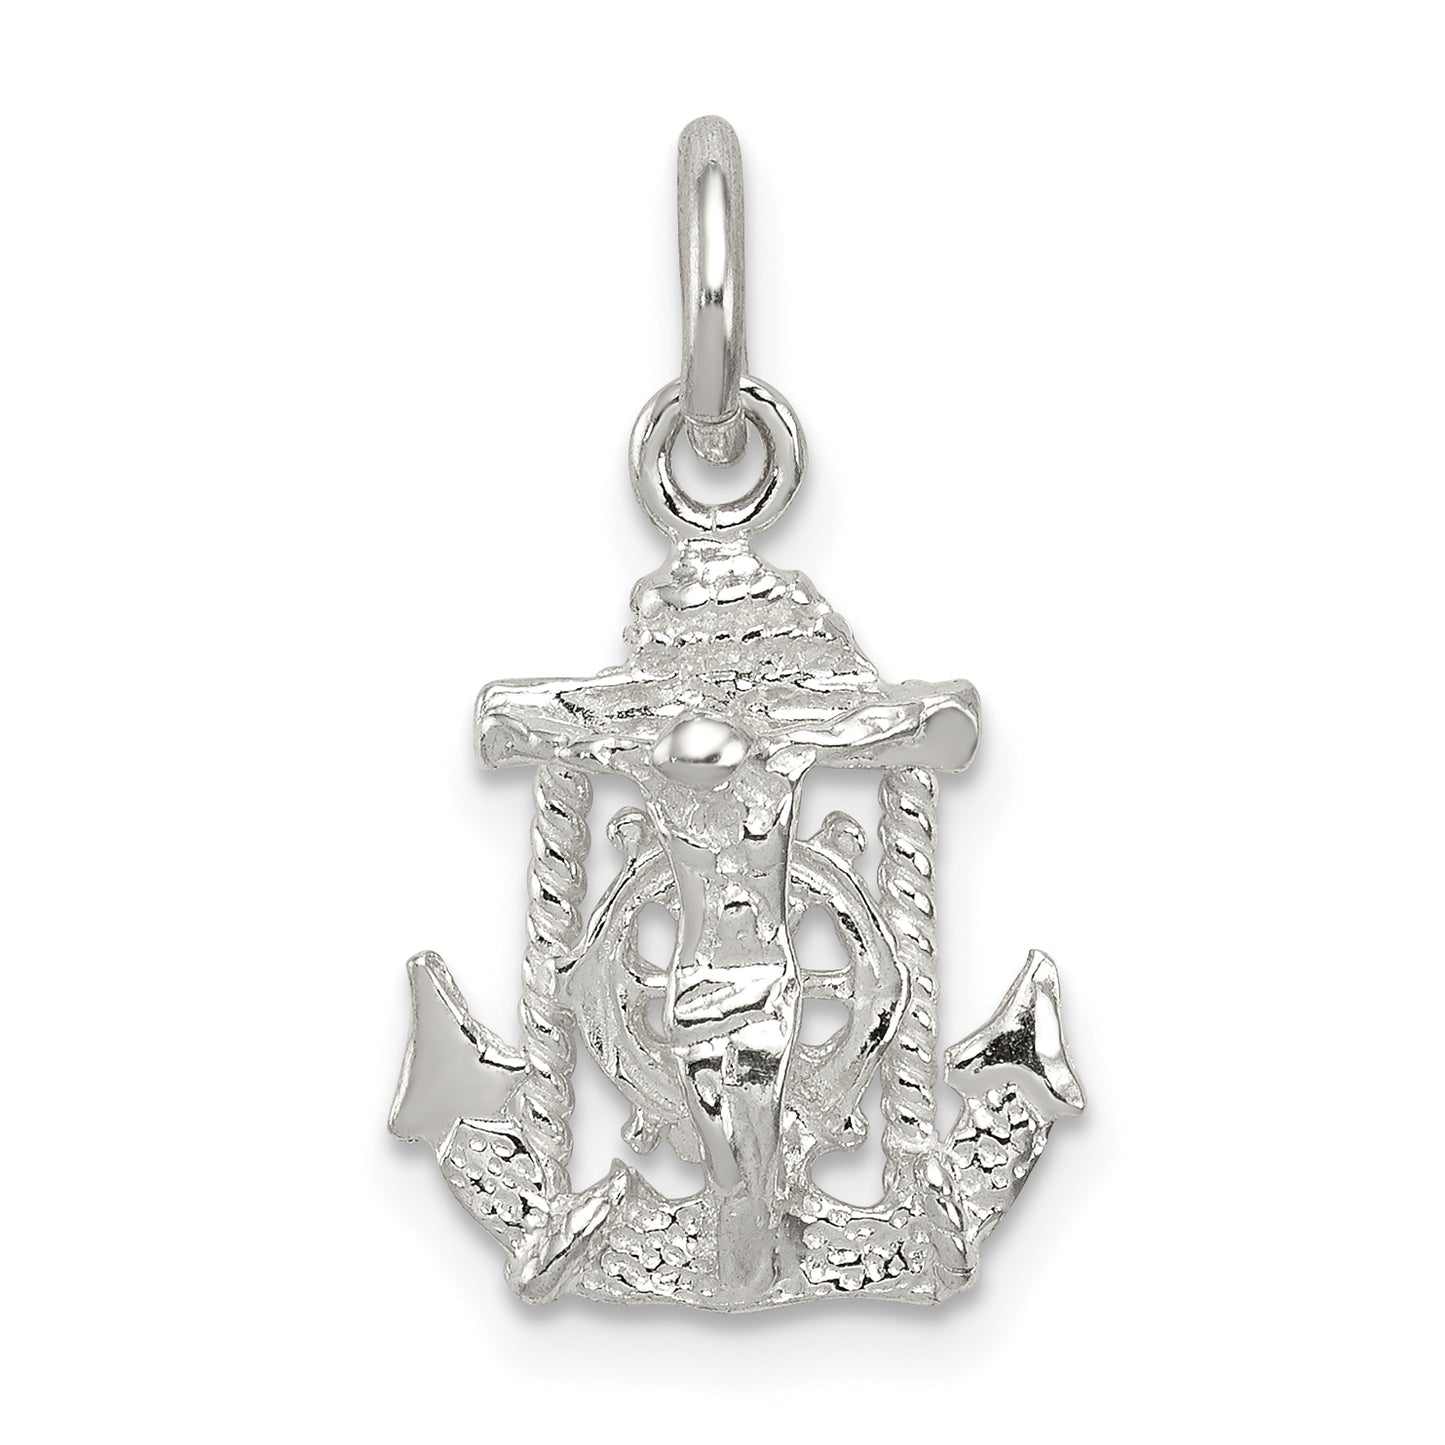 Sterling Silver Mariners Cross Charm